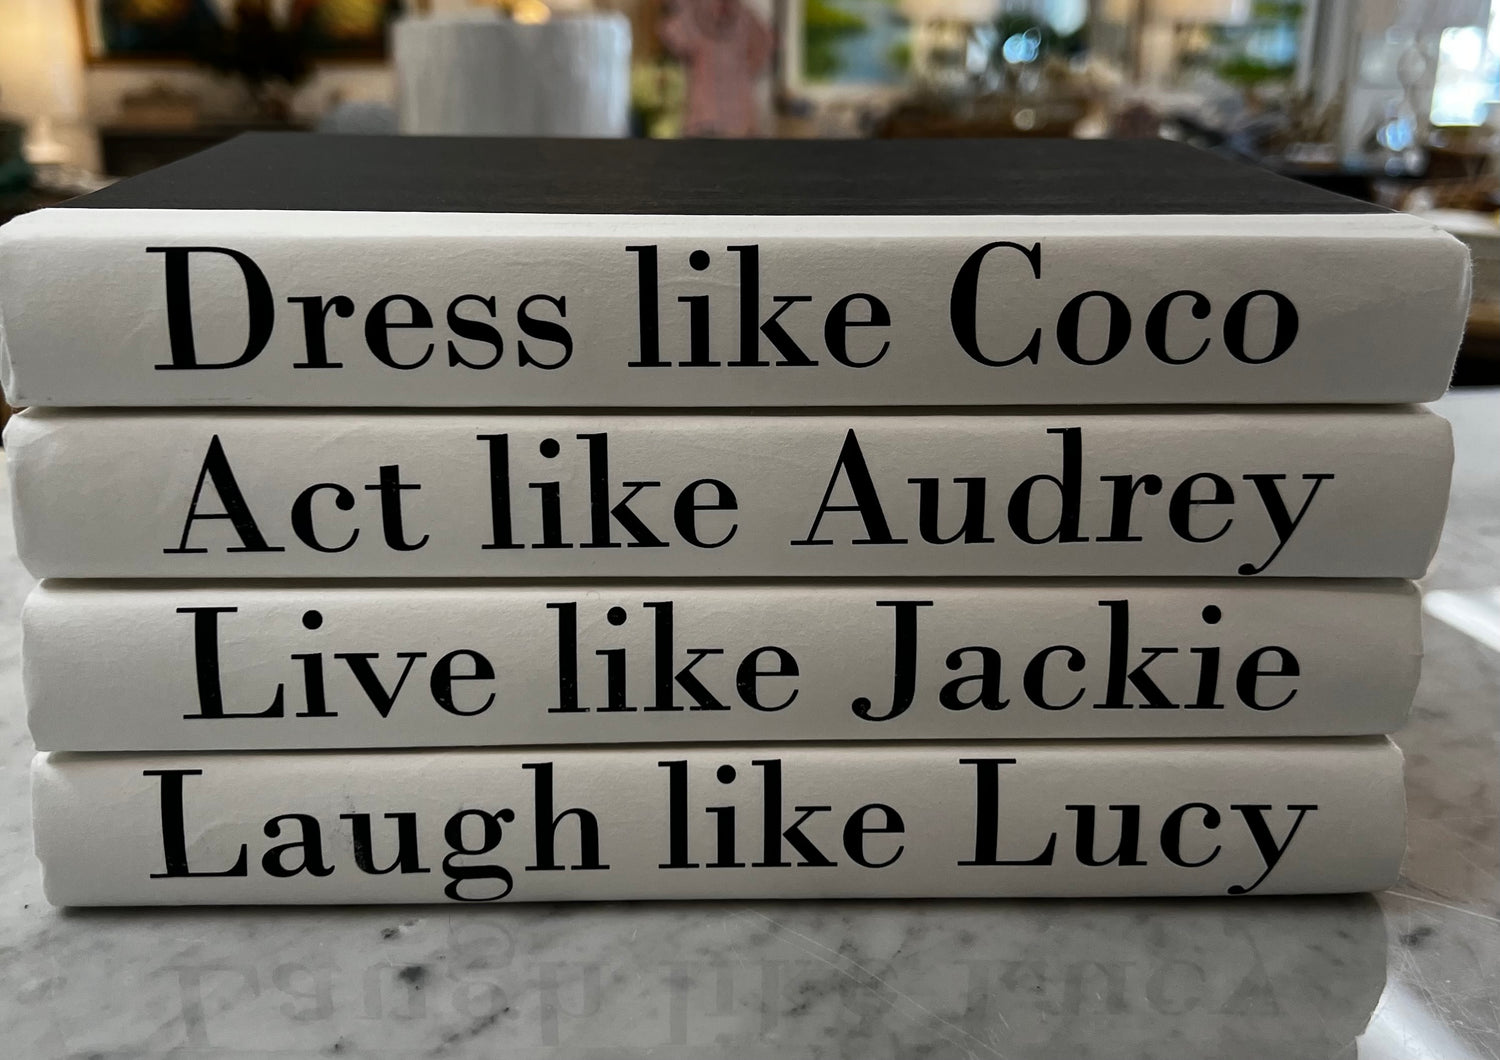 4 Vol. "Act Like Audrey"